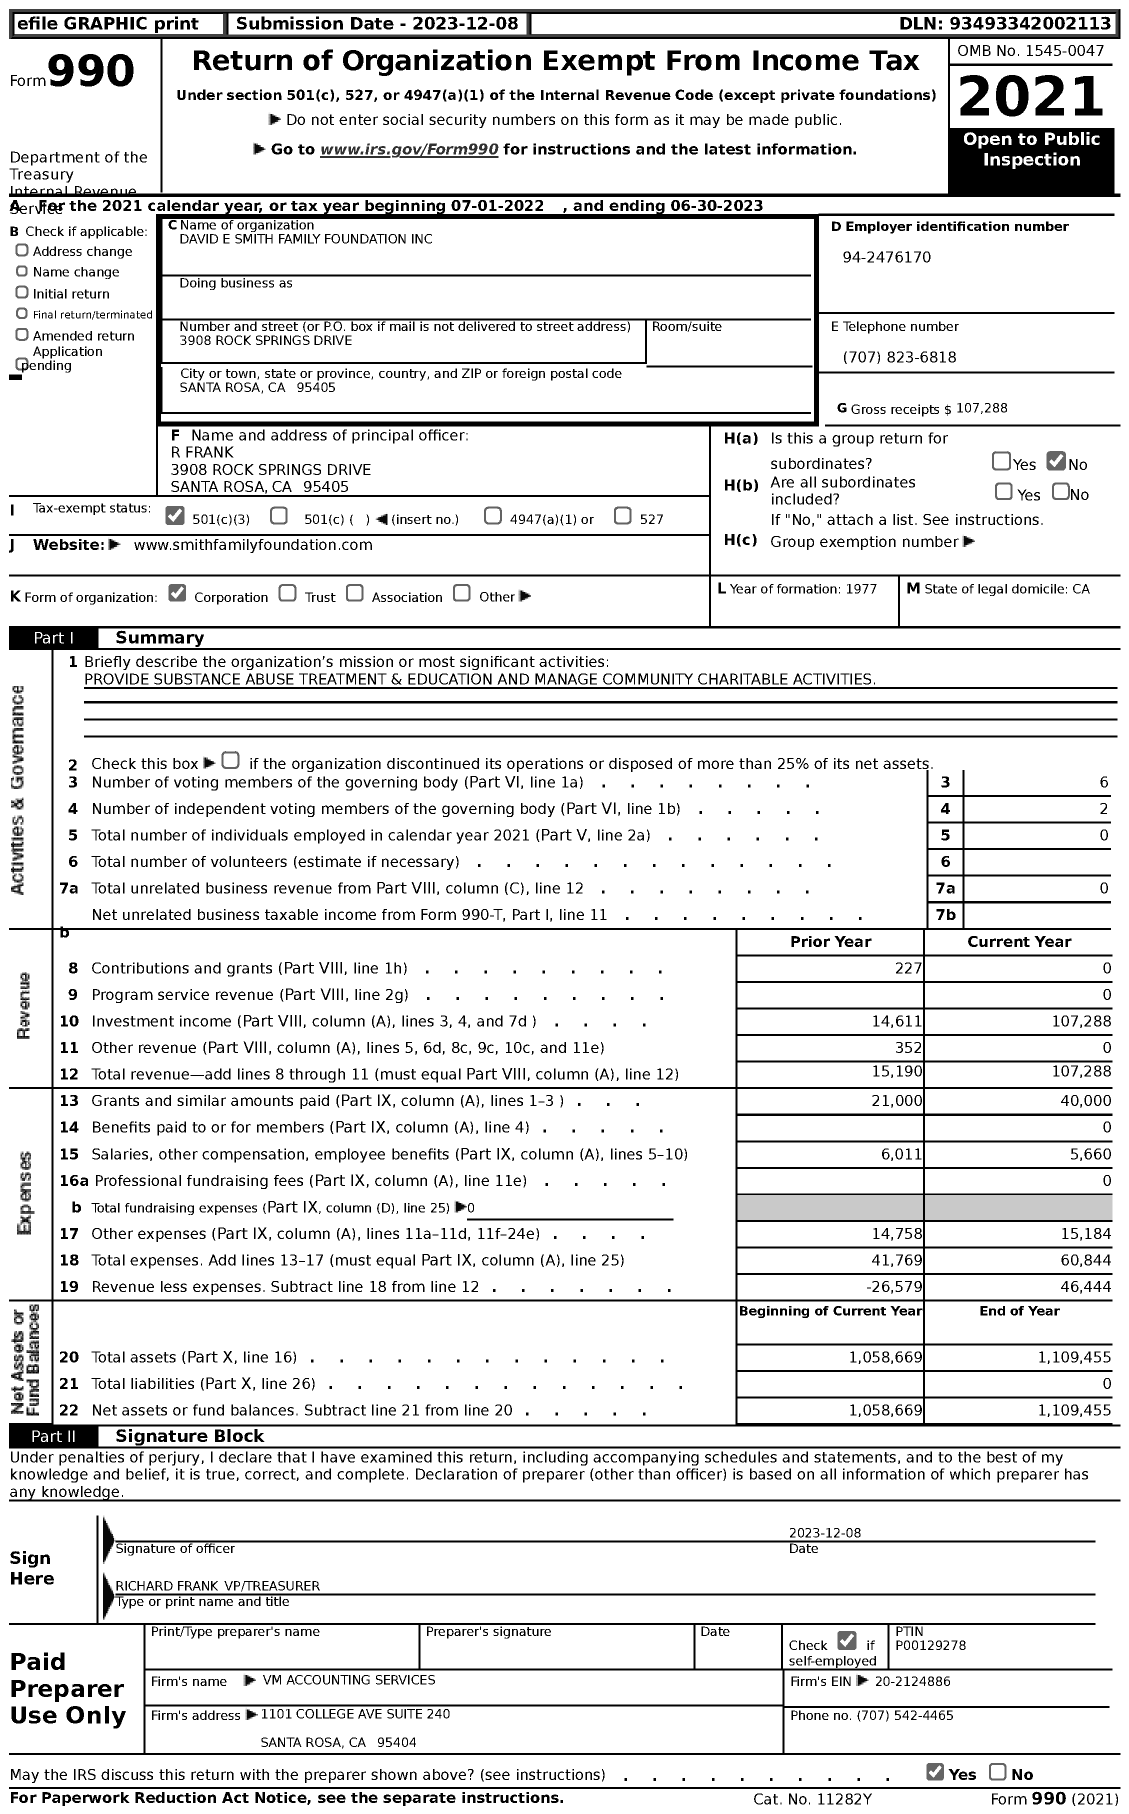 Image of first page of 2022 Form 990 for David E Smith Family Foundation